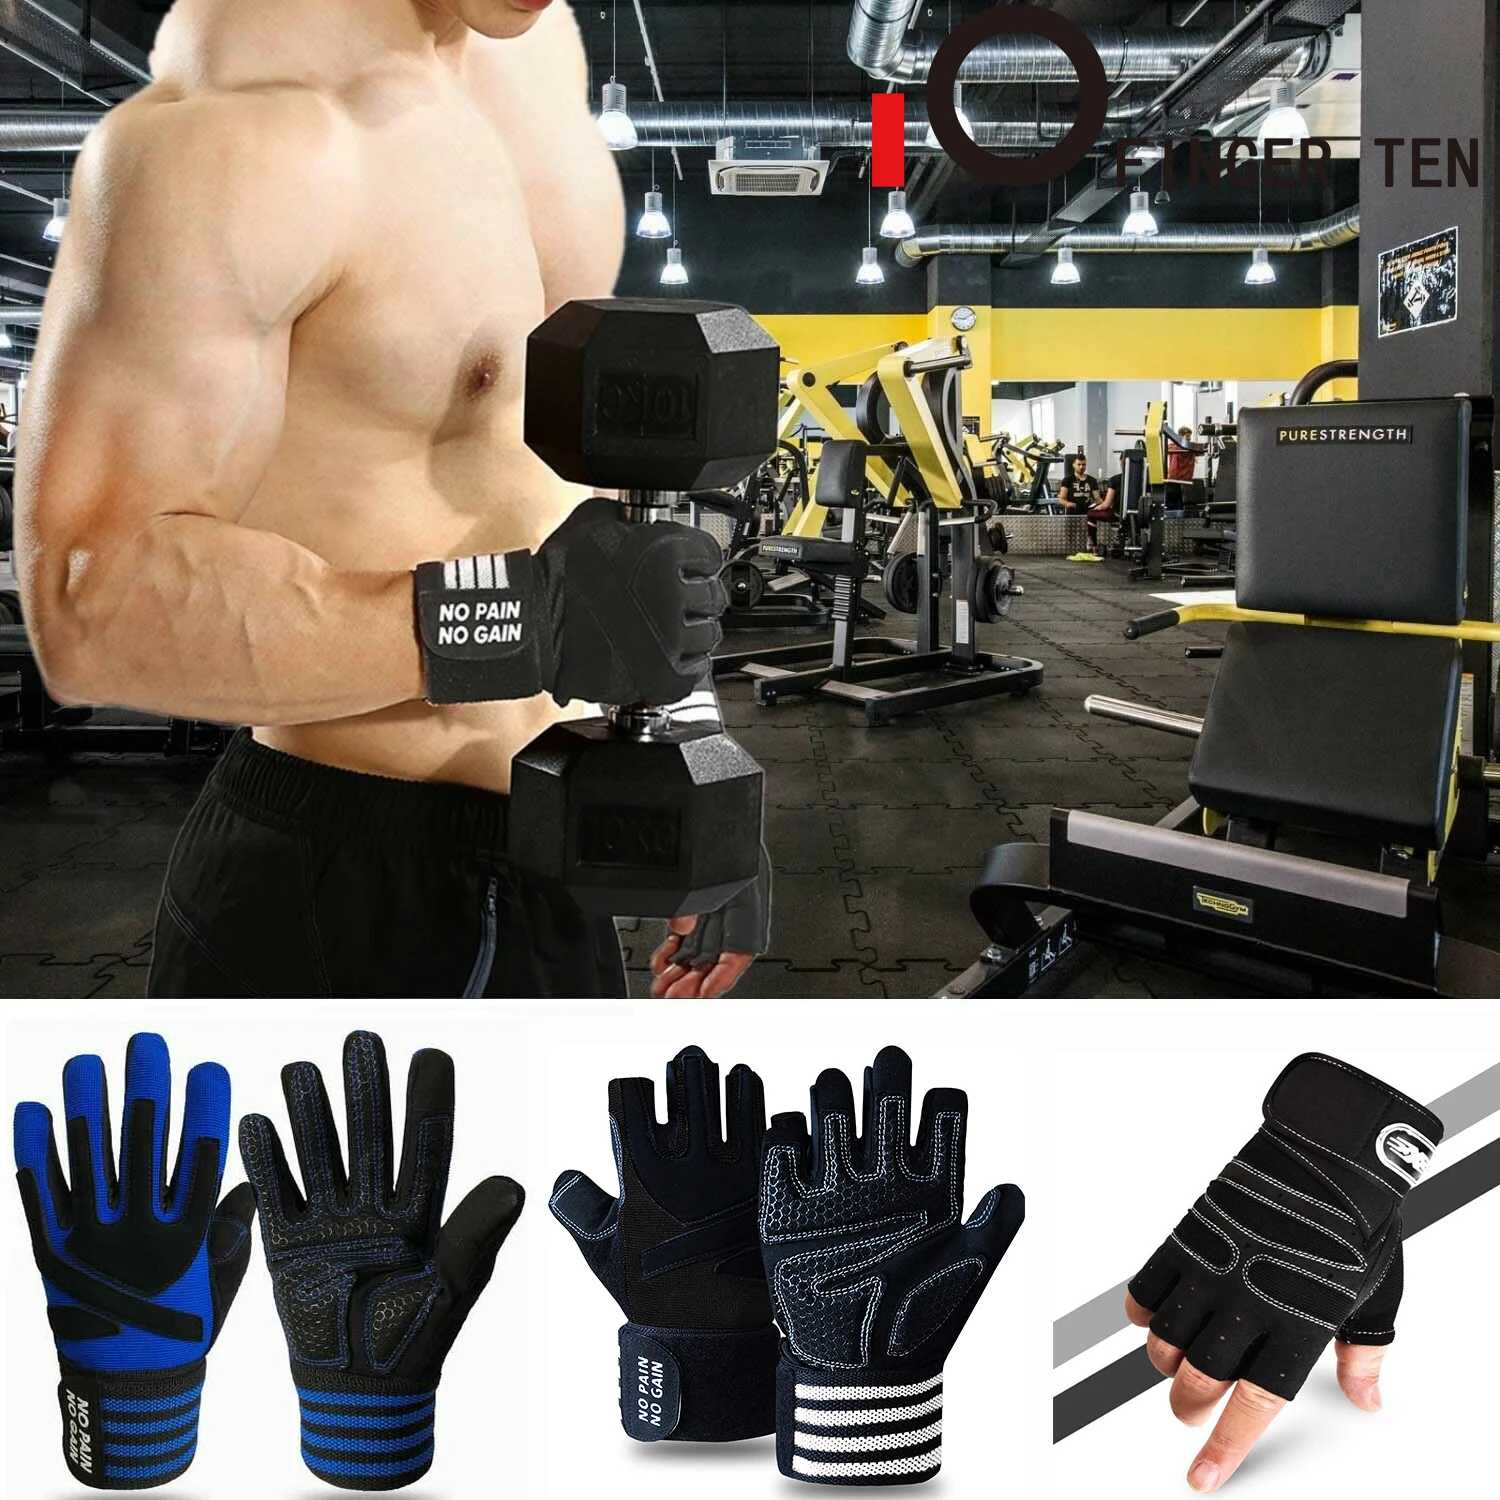 Gym Weight Lifting Body Fitness Gloves Kids/Adult Cycling boating fishing Gloves 